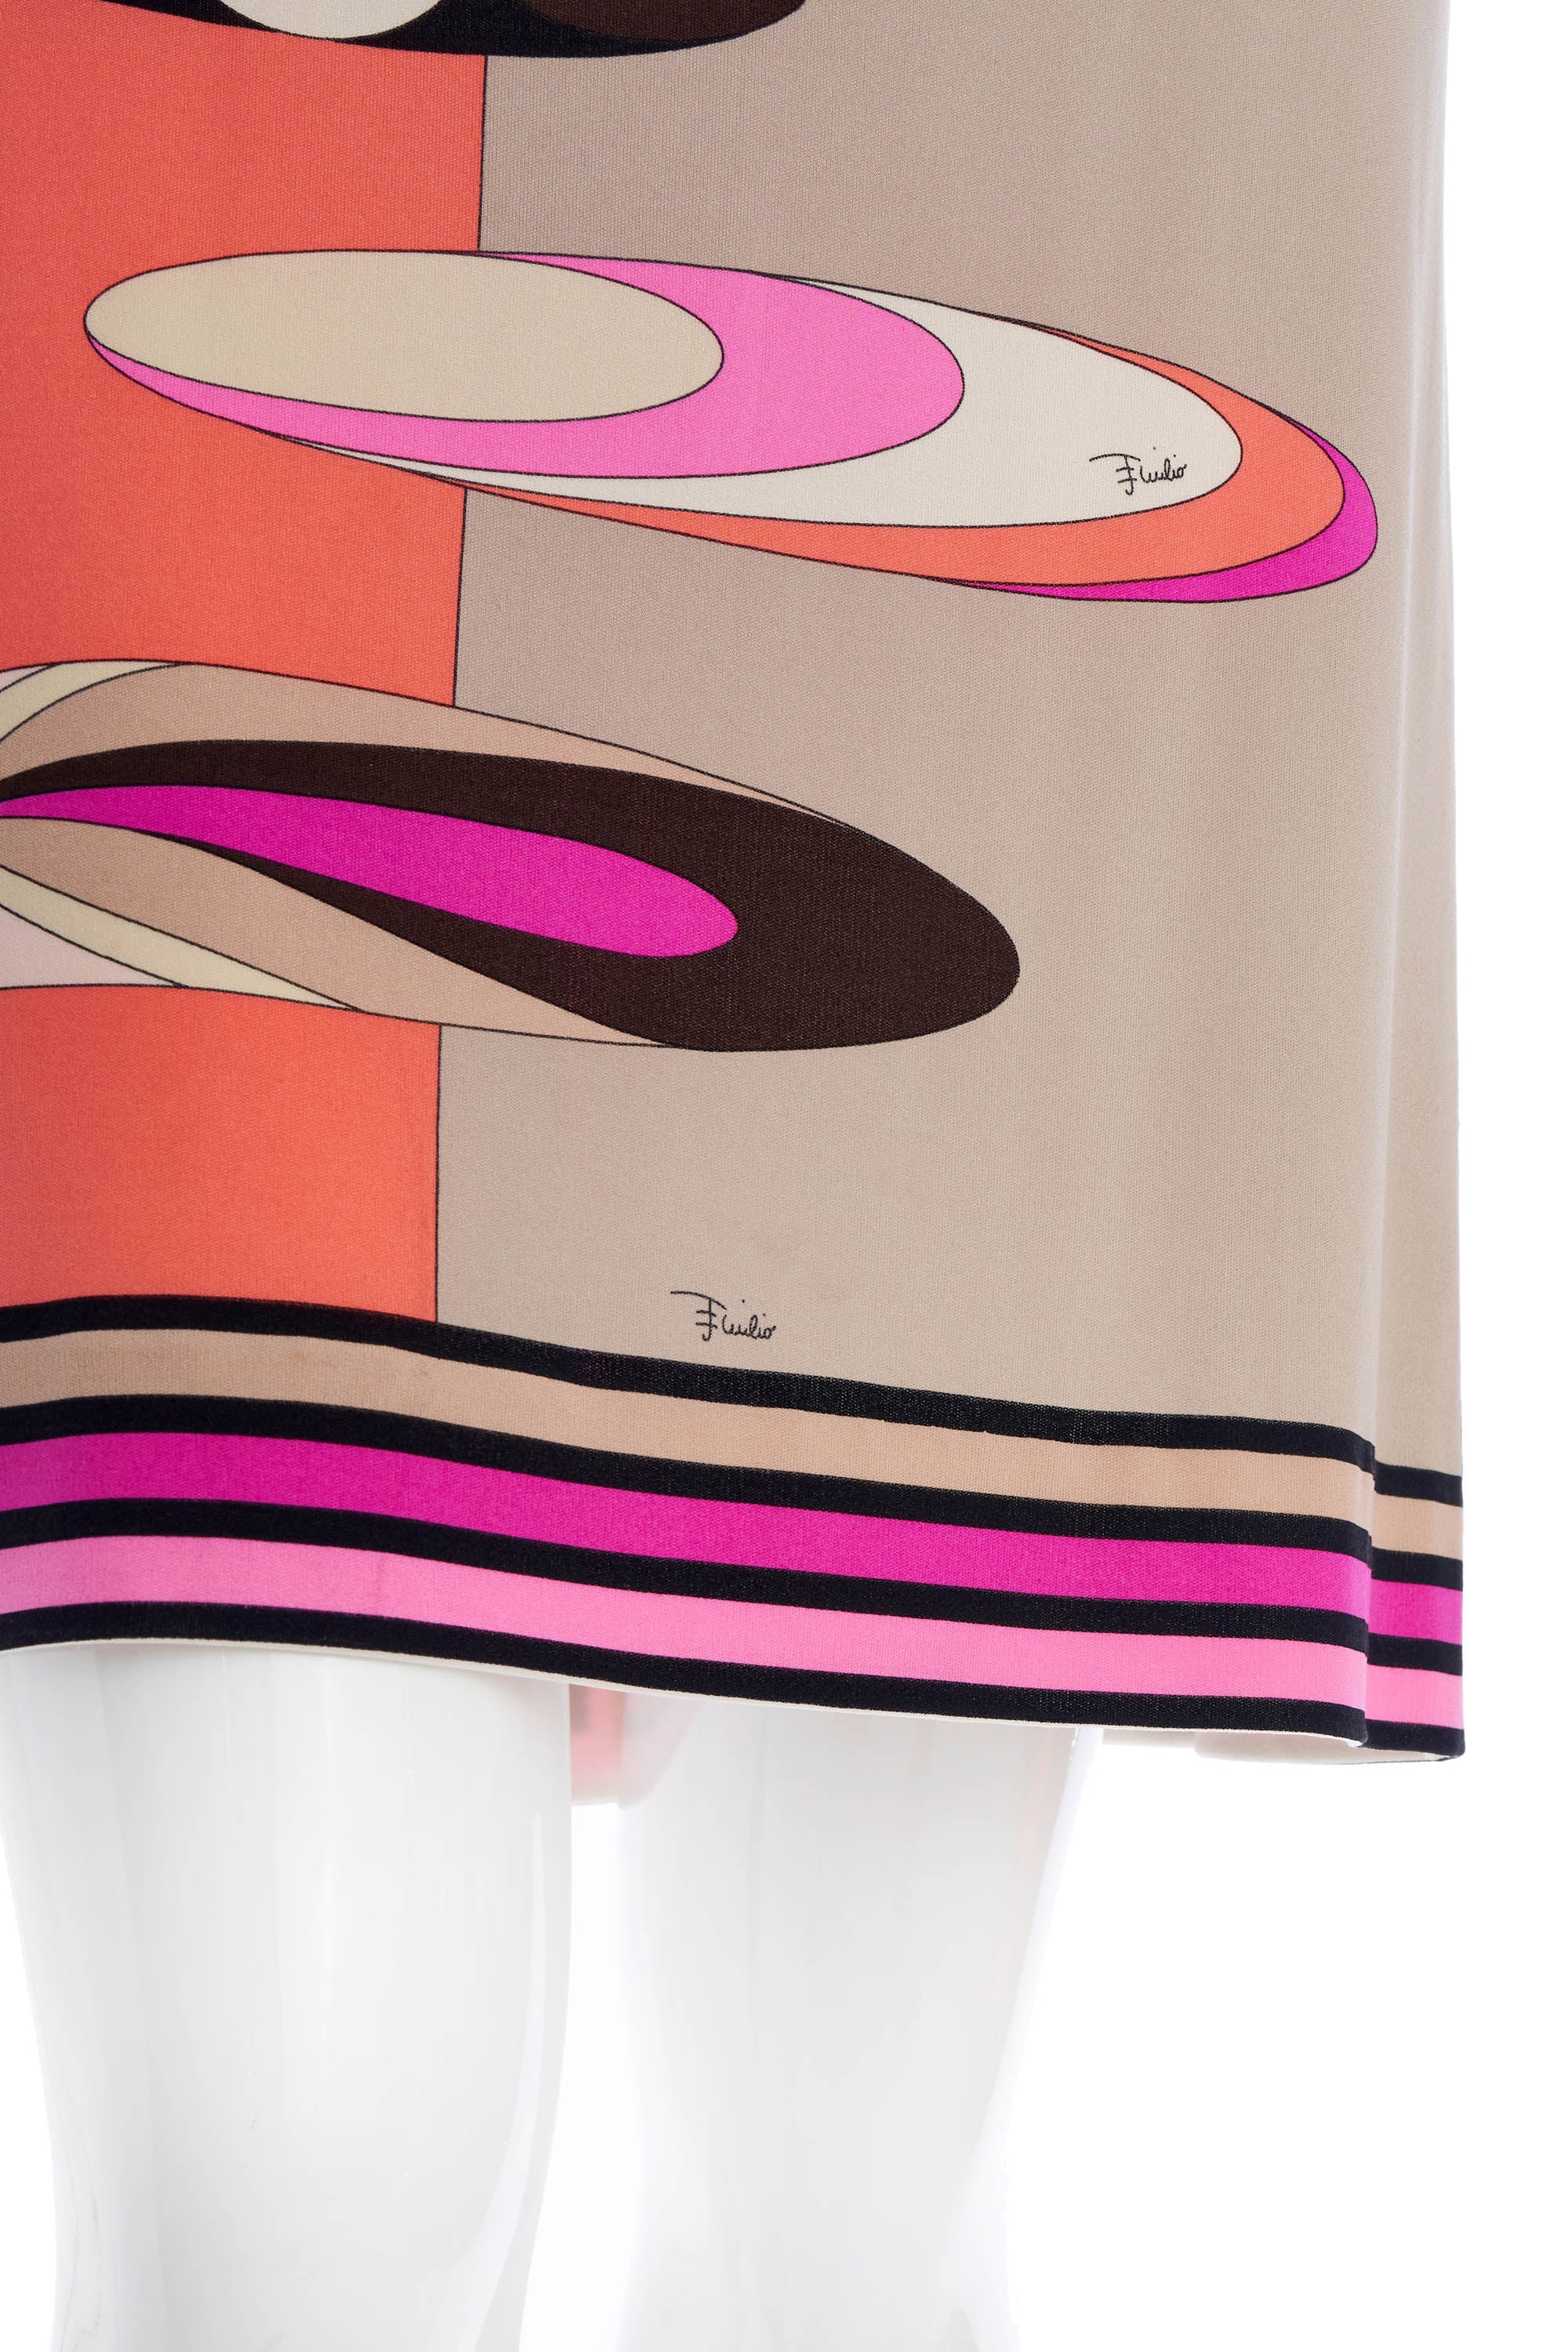 Emilio Pucci Pink and Orange Modern Print Dress with Crystal Belt Size M